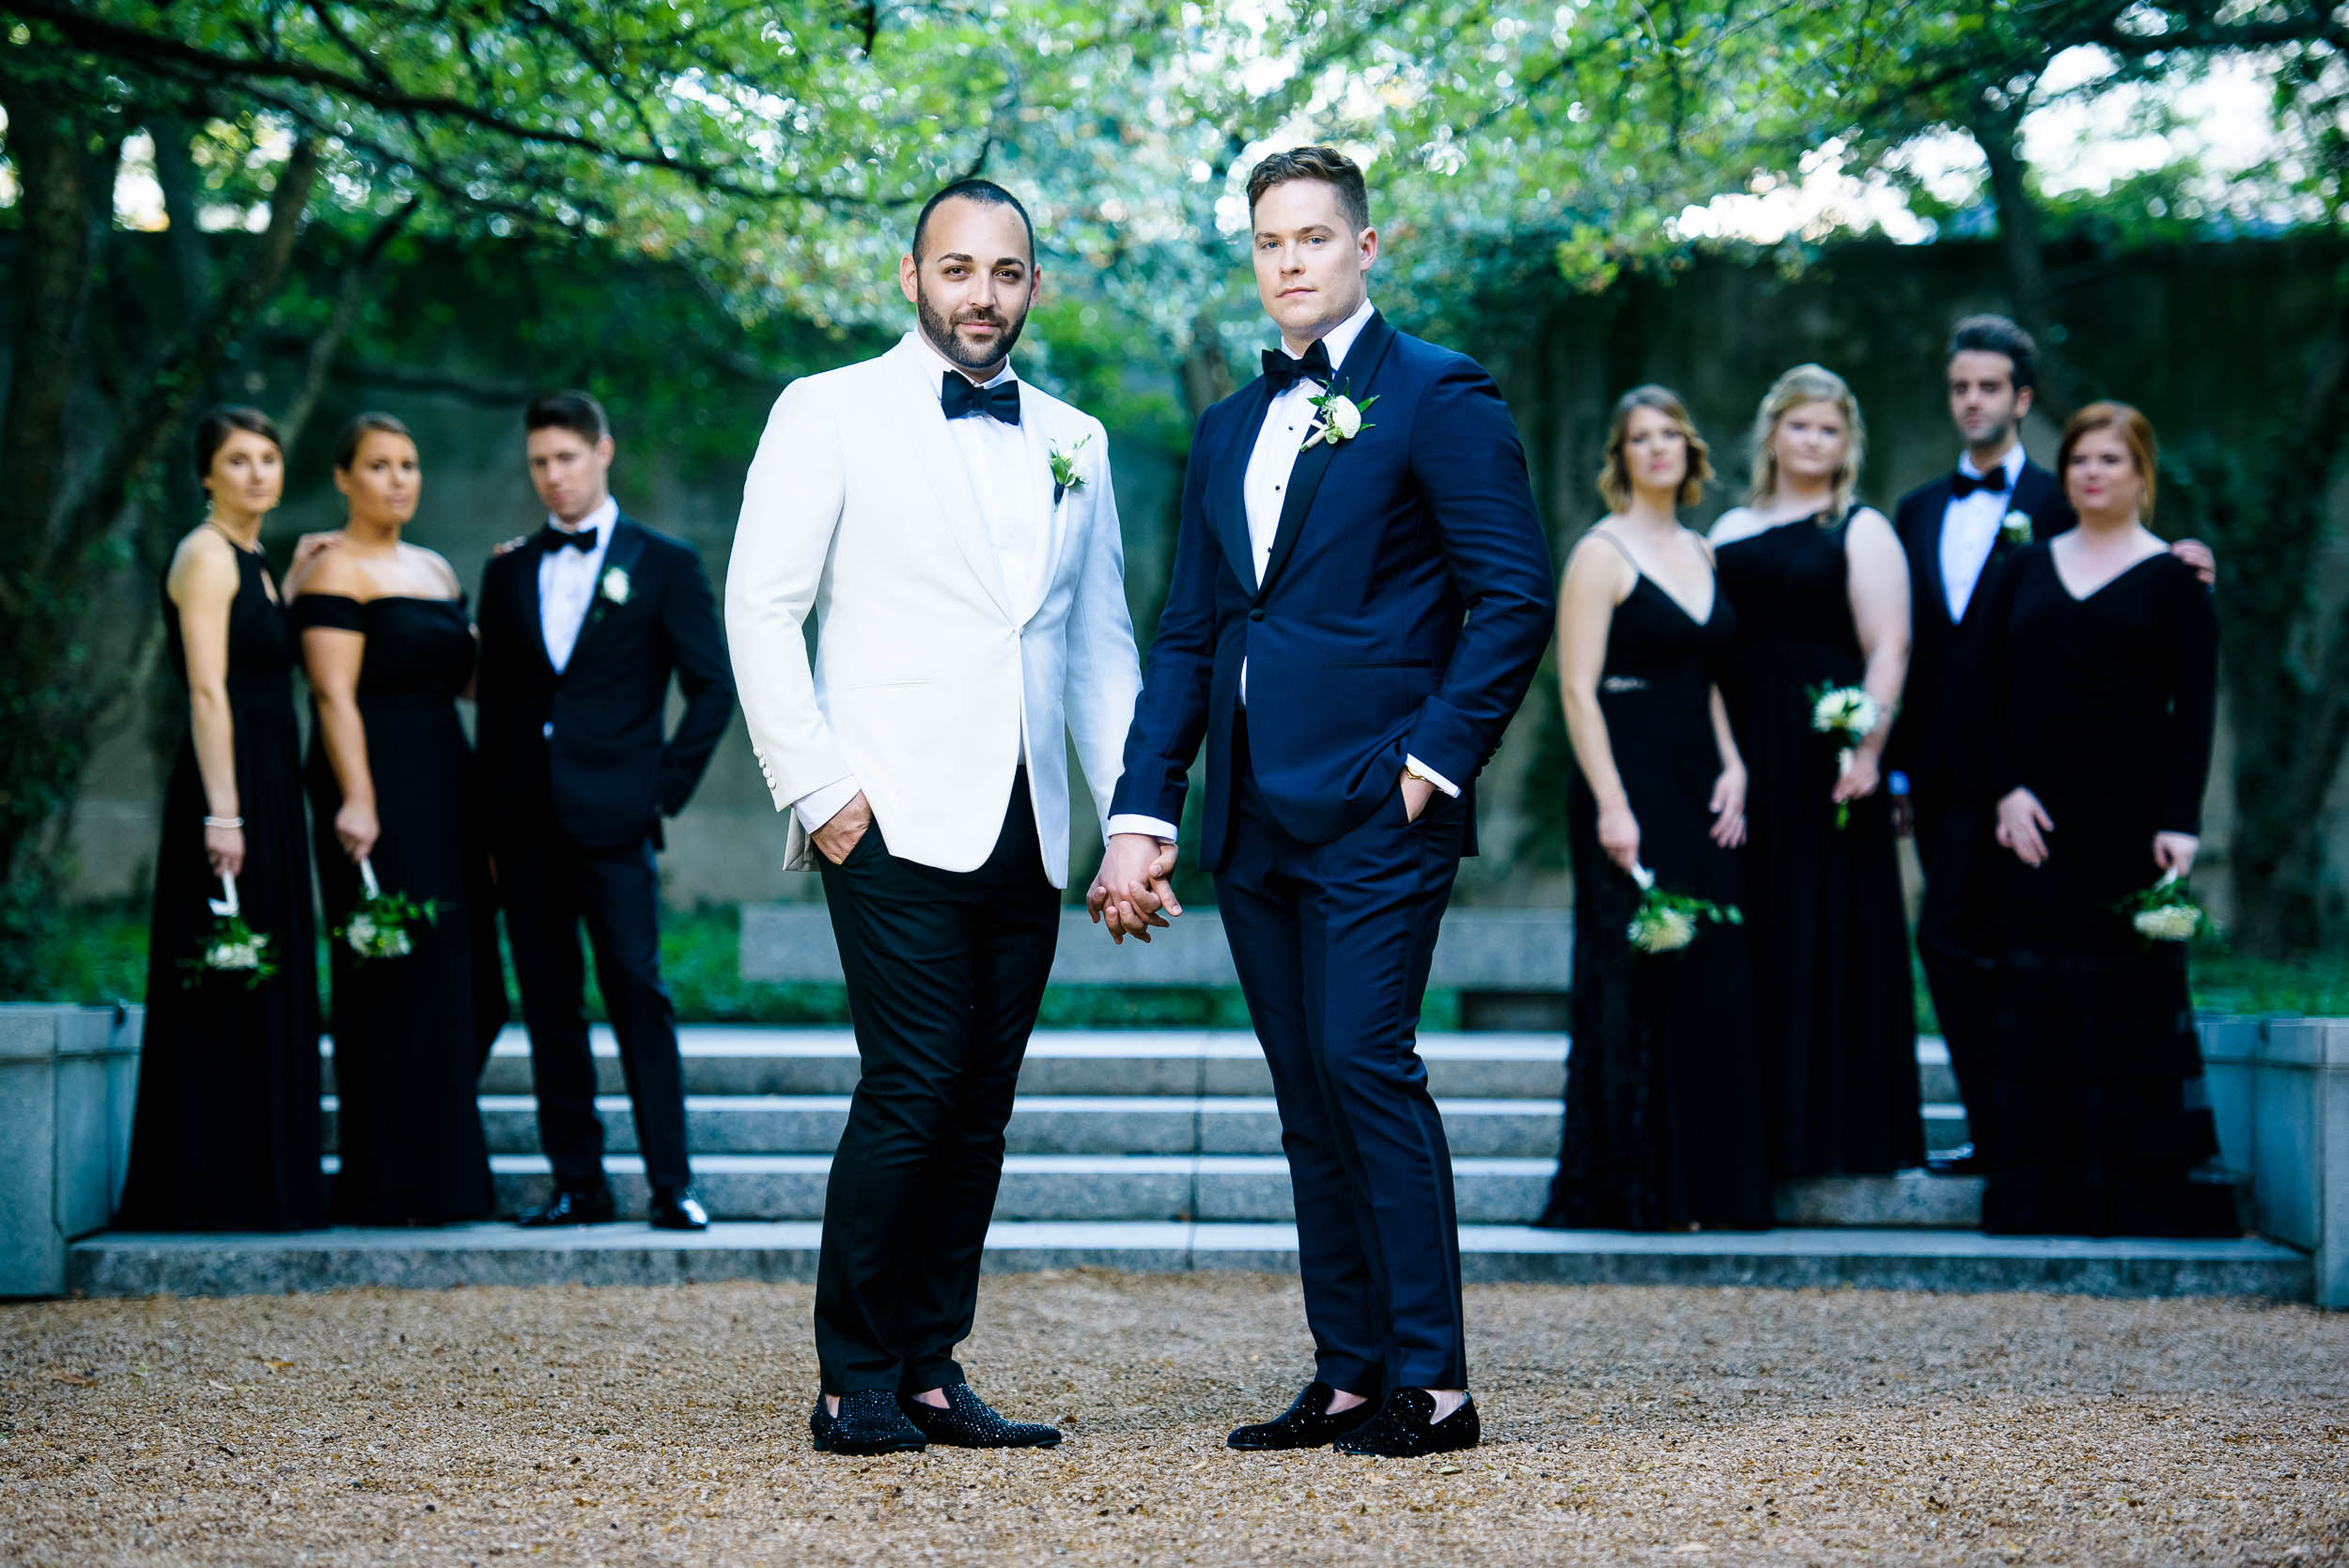 Grooms posing with wedding party for luxurious fall wedding at the Chicago Symphony Center captured by J. Brown Photography. See more wedding ideas at jbrownphotography.com!